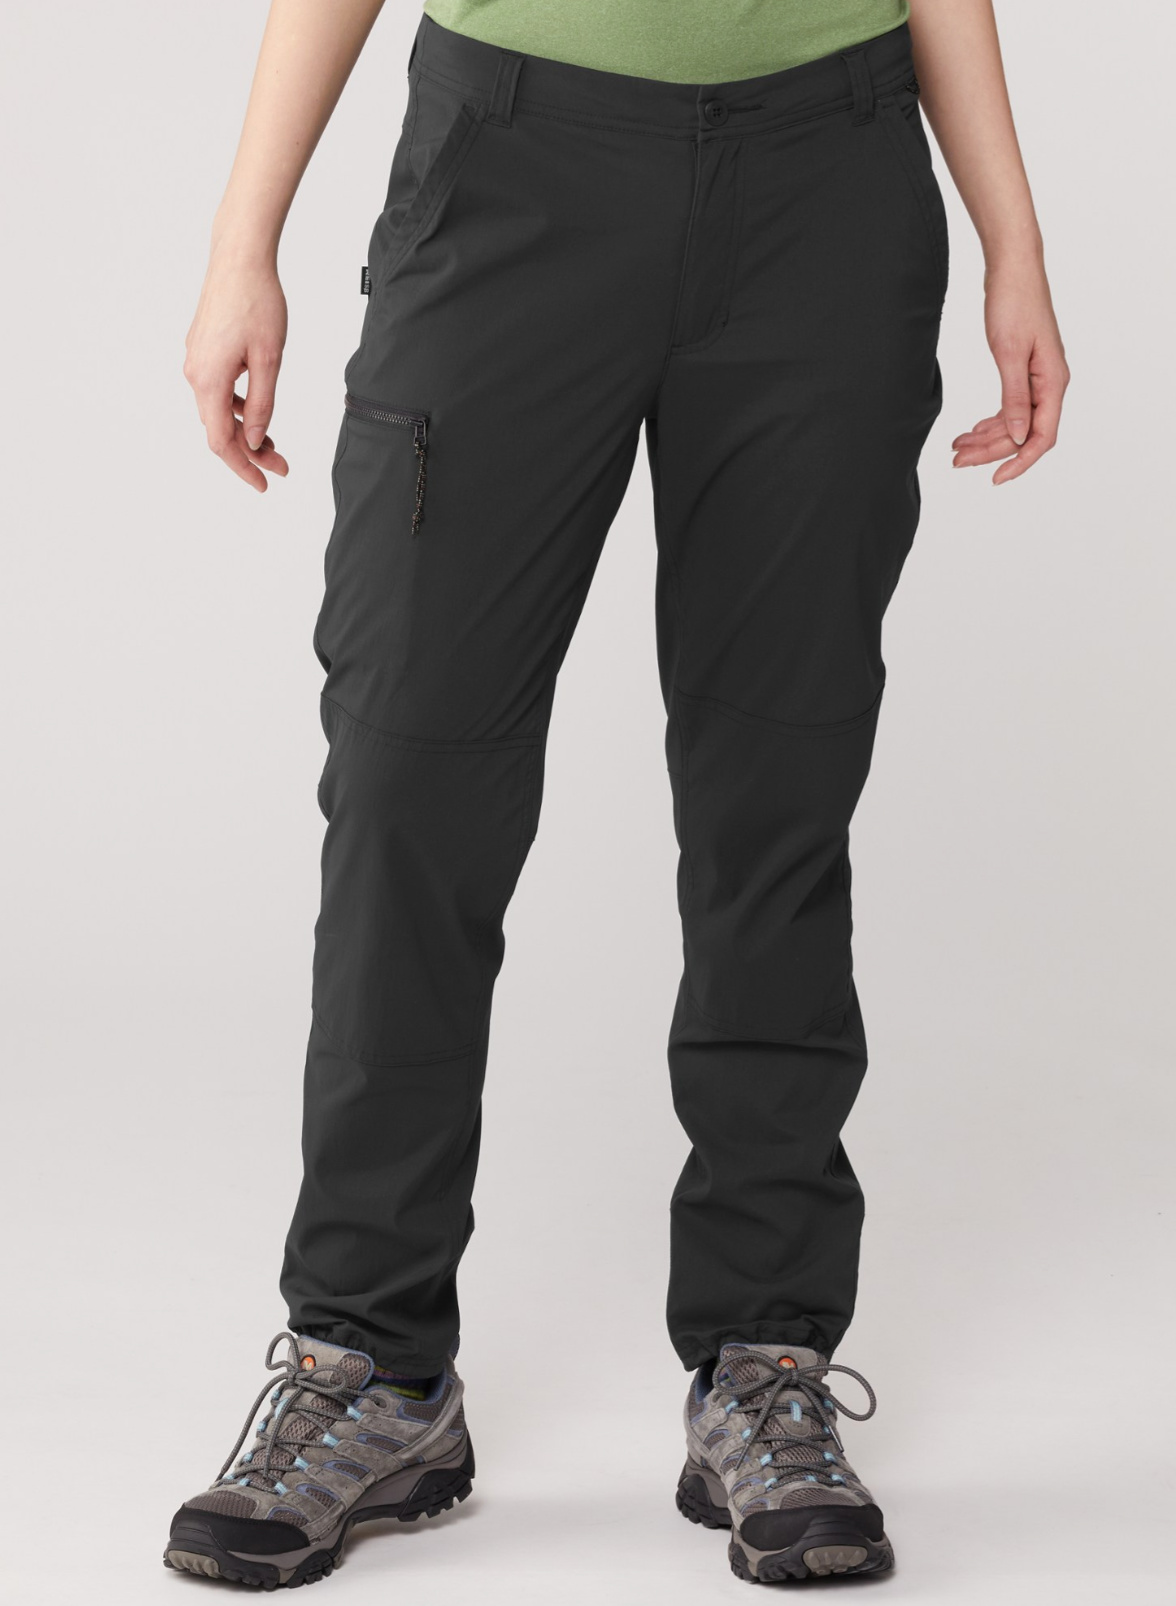 Soothfeel Women's Lightweight Quick Dry Cargo Capris with 6 Pockets